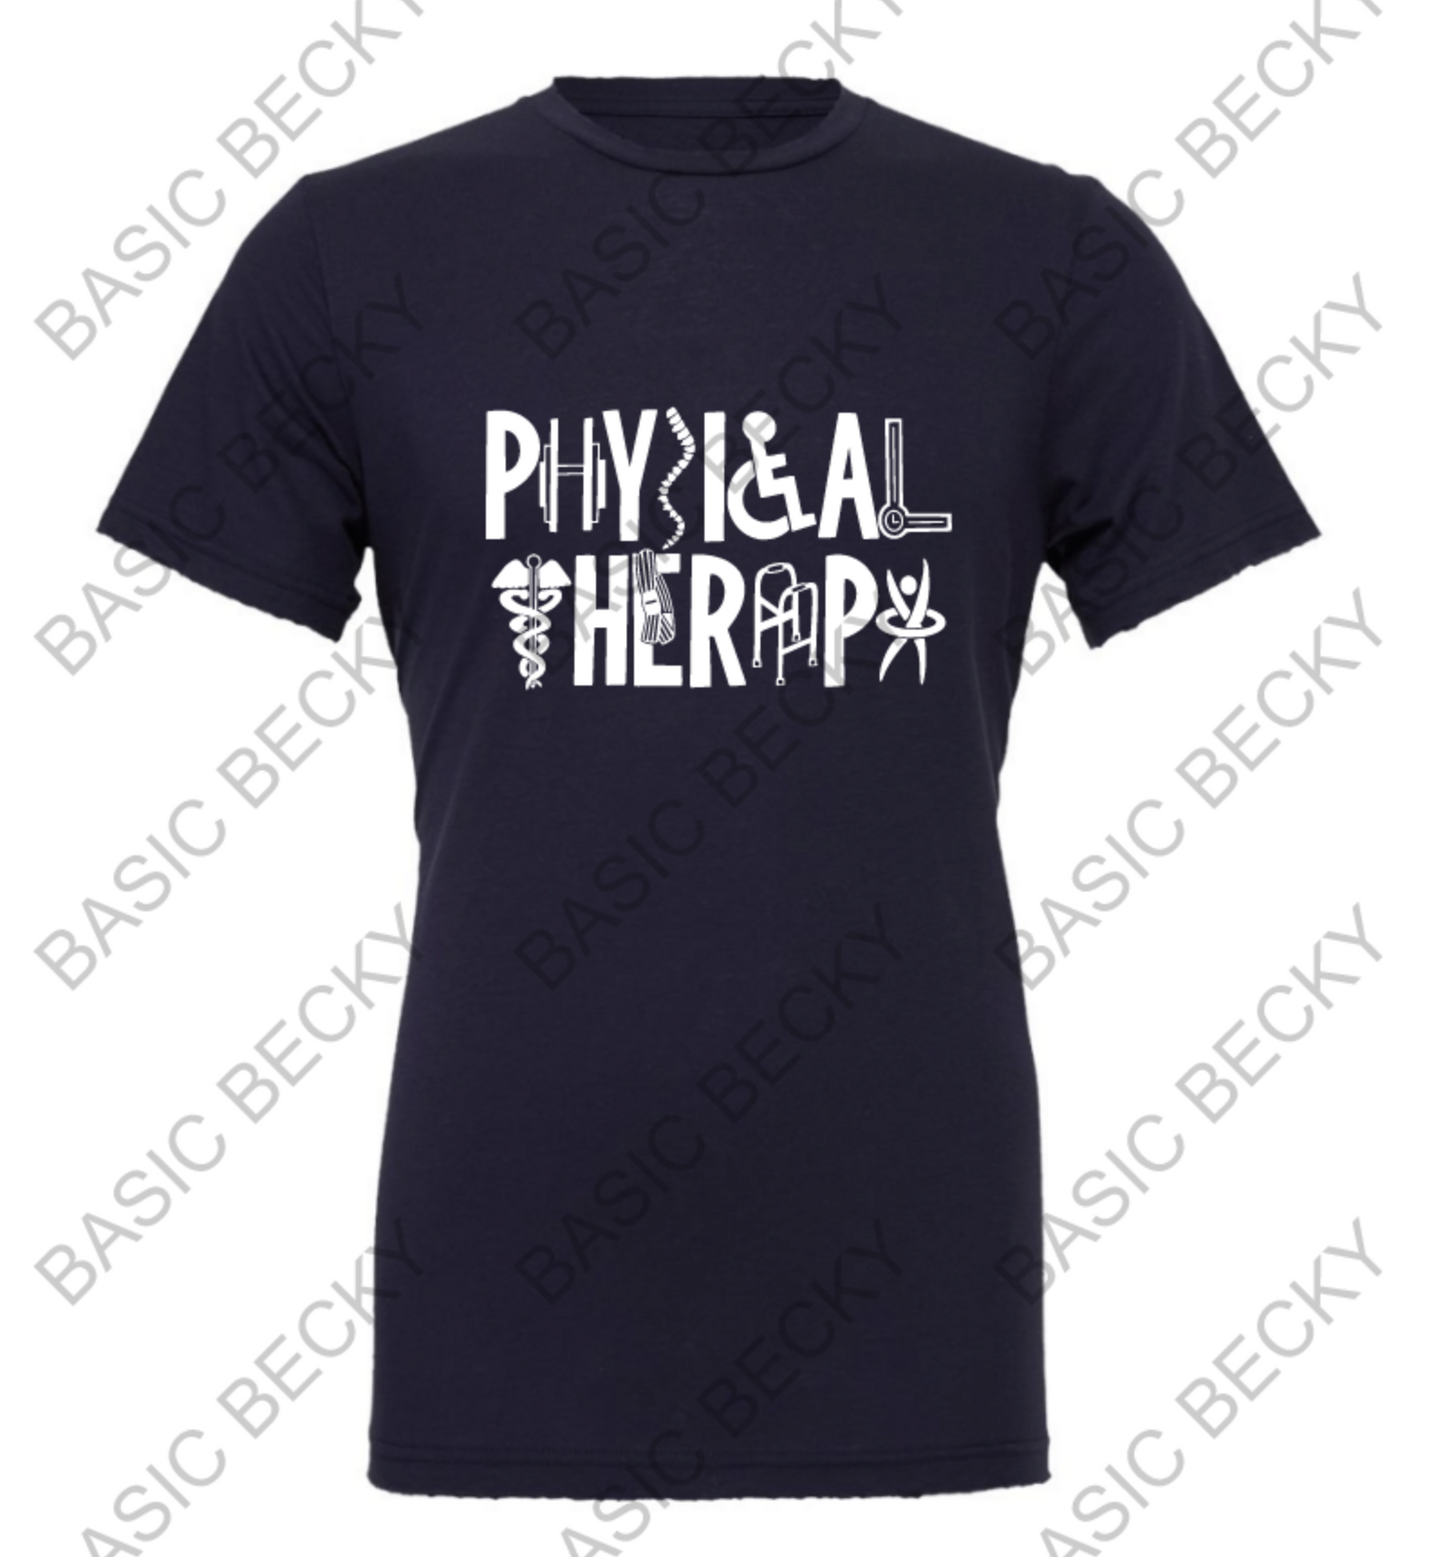 PHYSICAL THERAPY